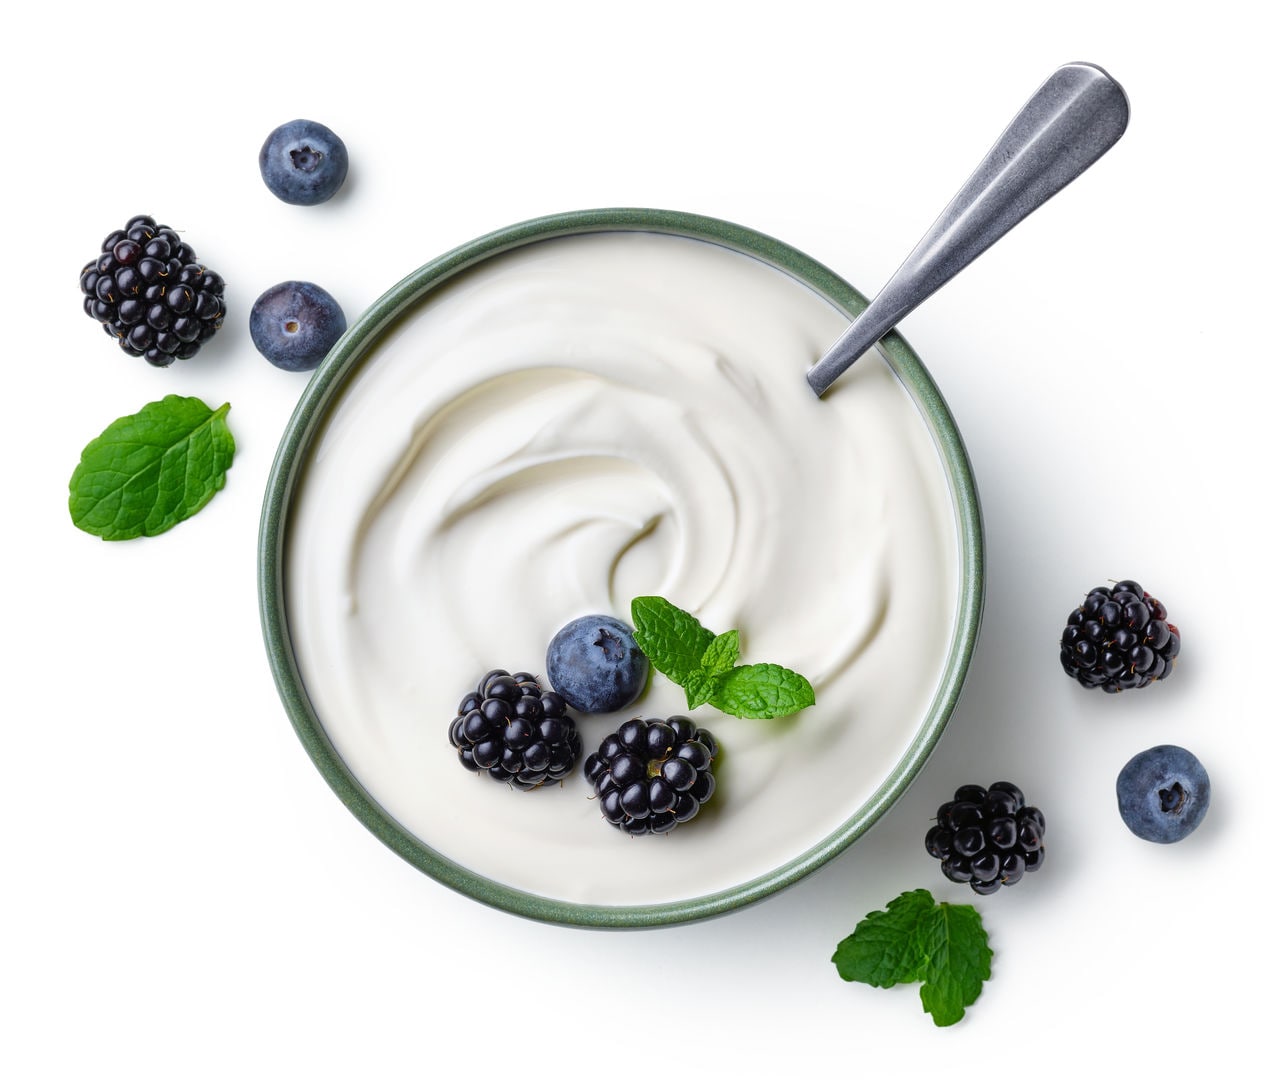 dsm-firmenich launches Delvo ® Fresh Pioneer starter cultures for impressive pH stability throughout indulgent mild yogurt production and shelf life